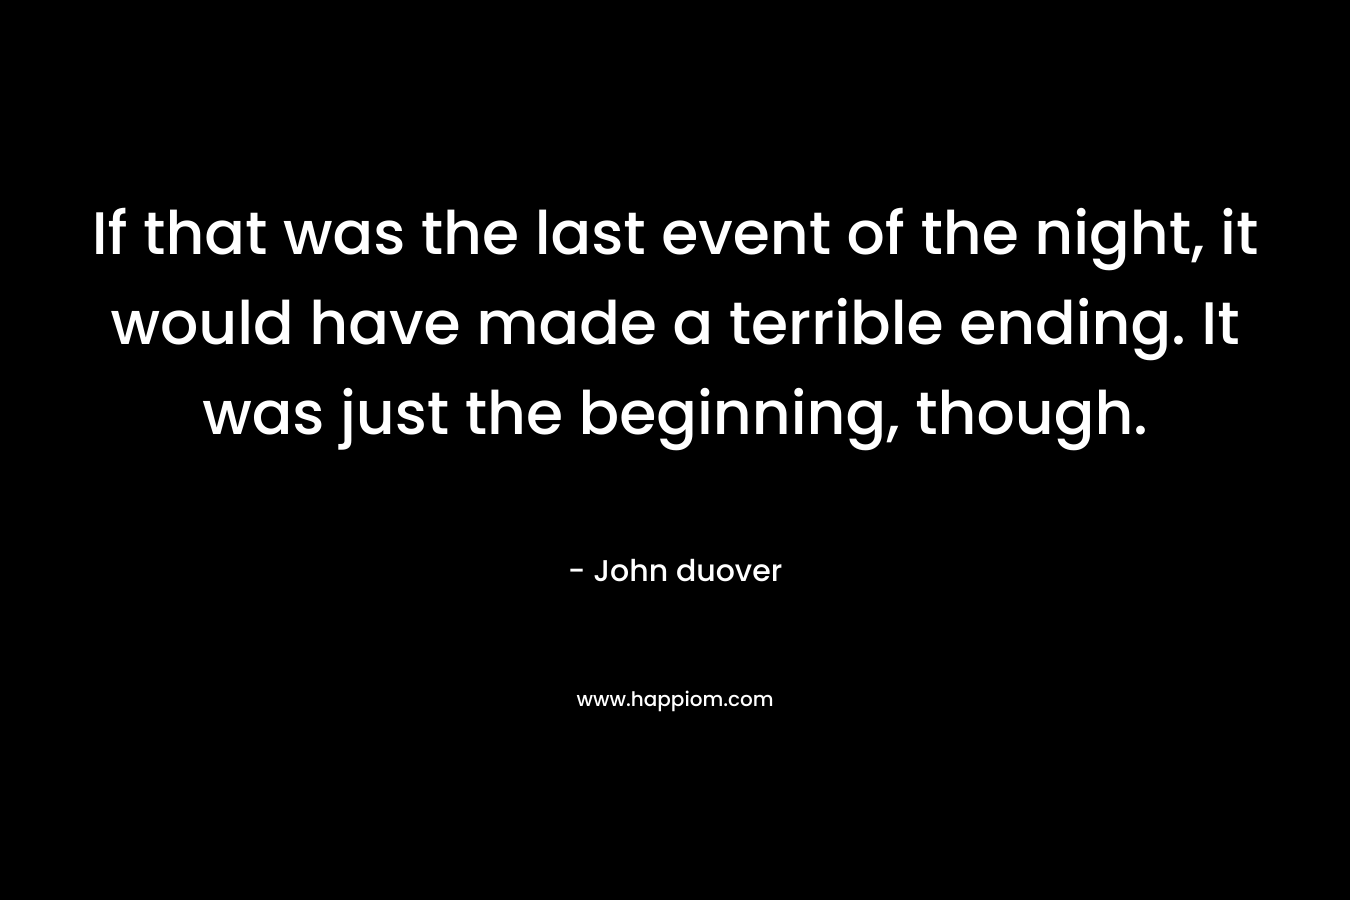 If that was the last event of the night, it would have made a terrible ending. It was just the beginning, though. – John duover